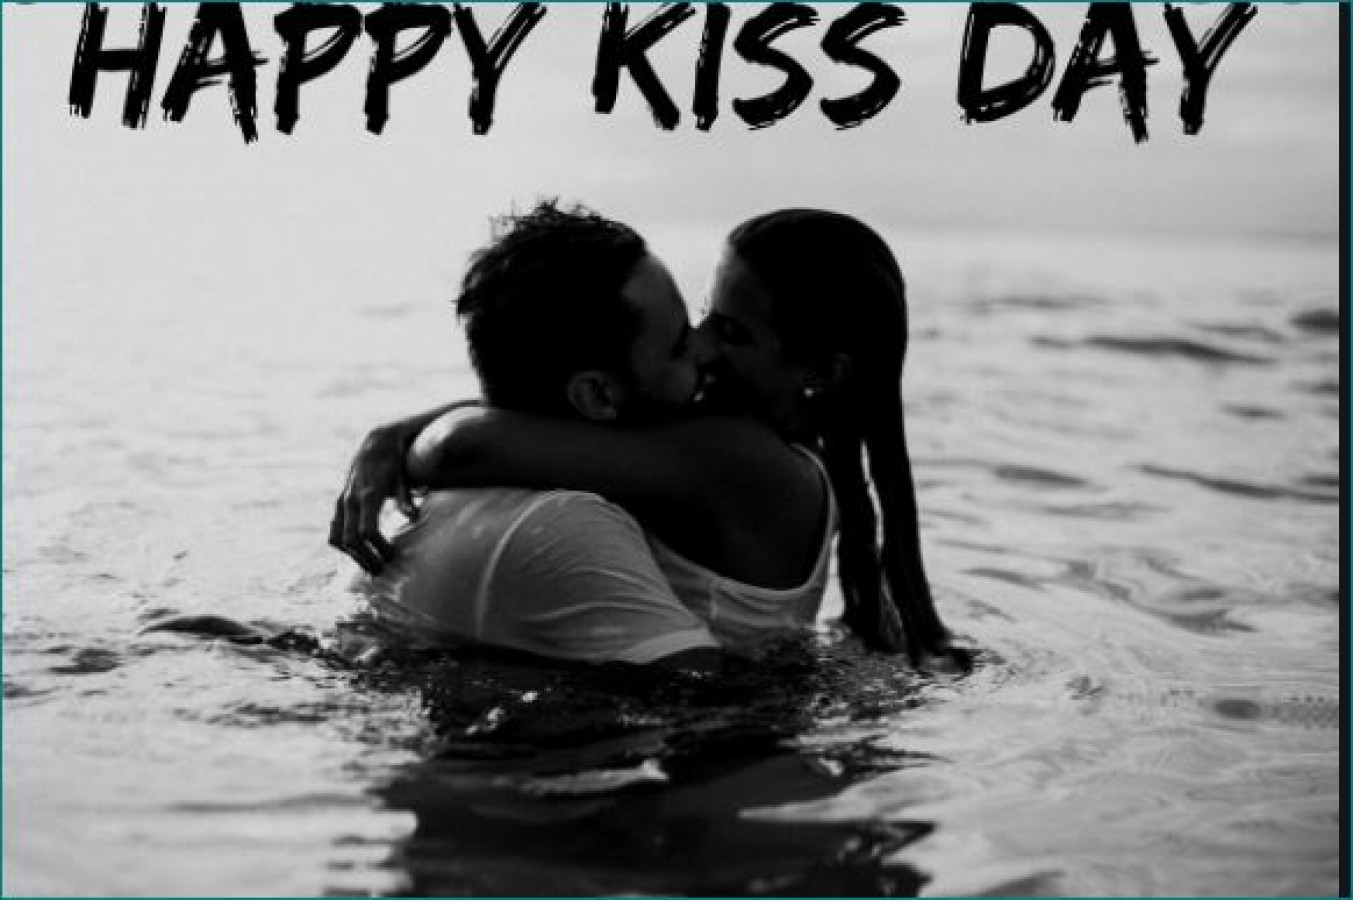 Send this romantic video to your partner on Kiss Day | NewsTrack ...